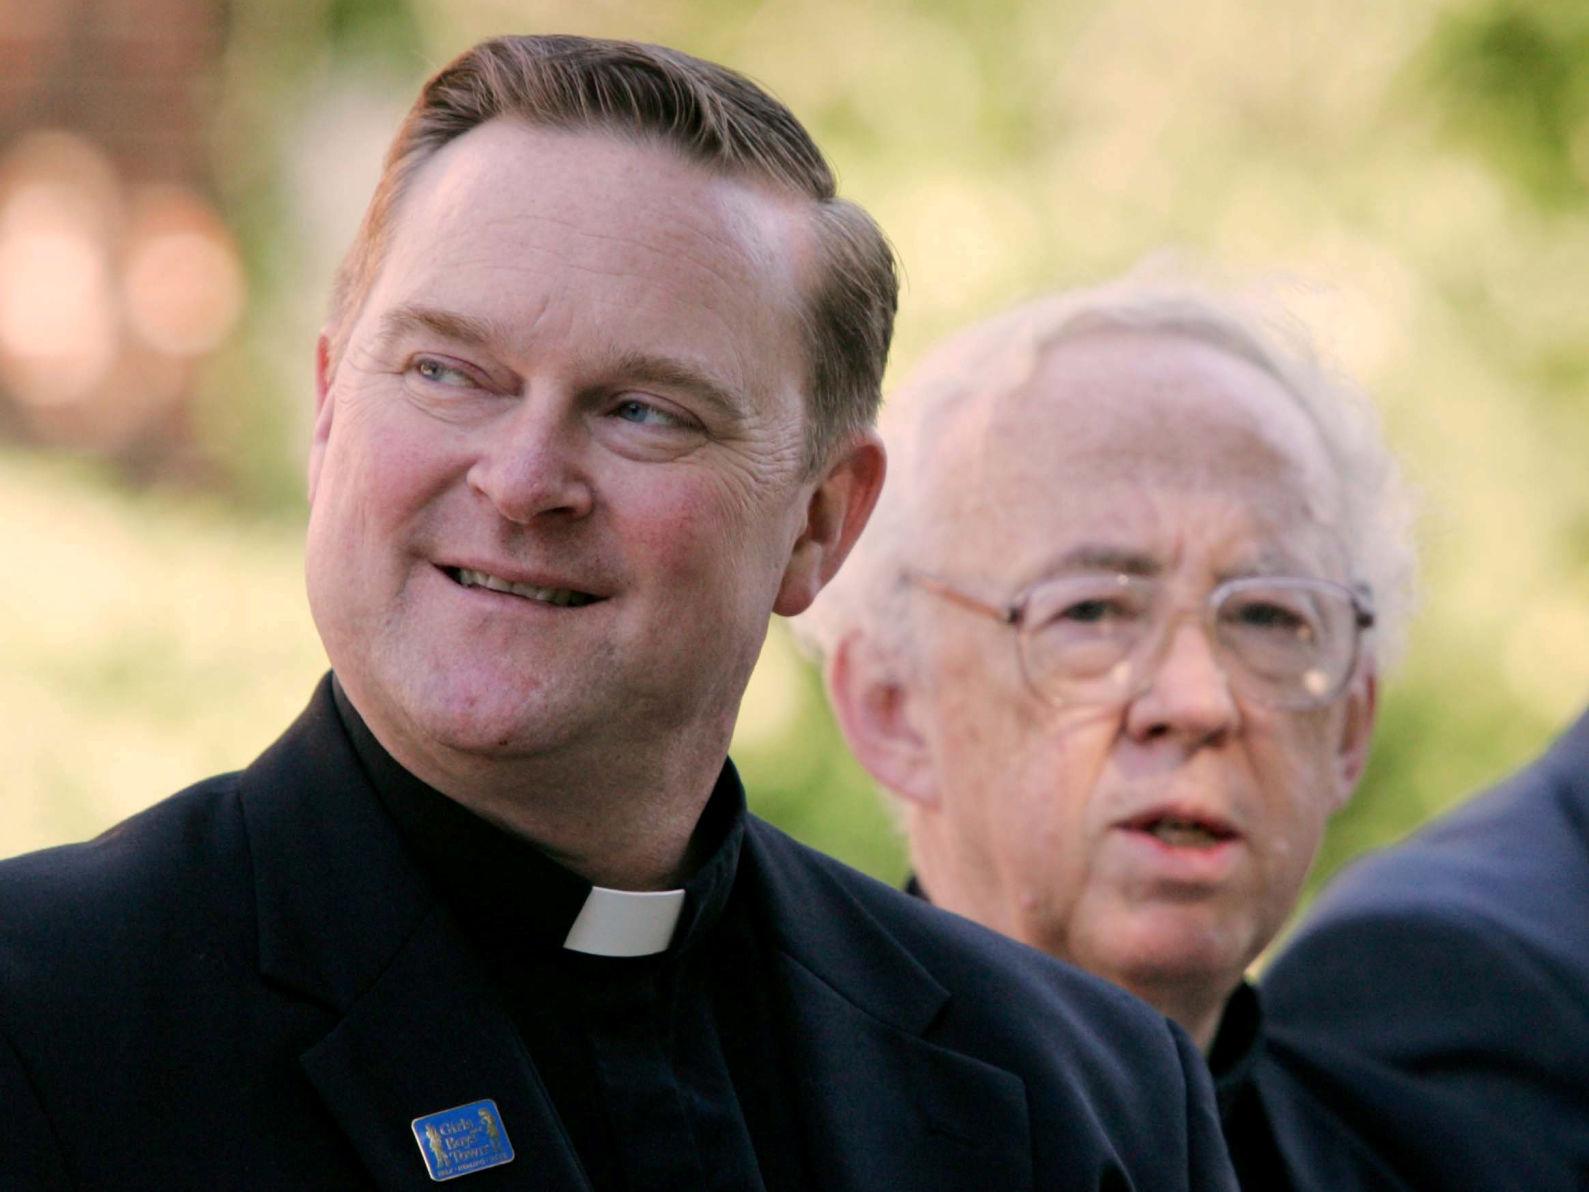 Rev. Val Peter wants to return to 'grandfatherly' role at Boys Town ...